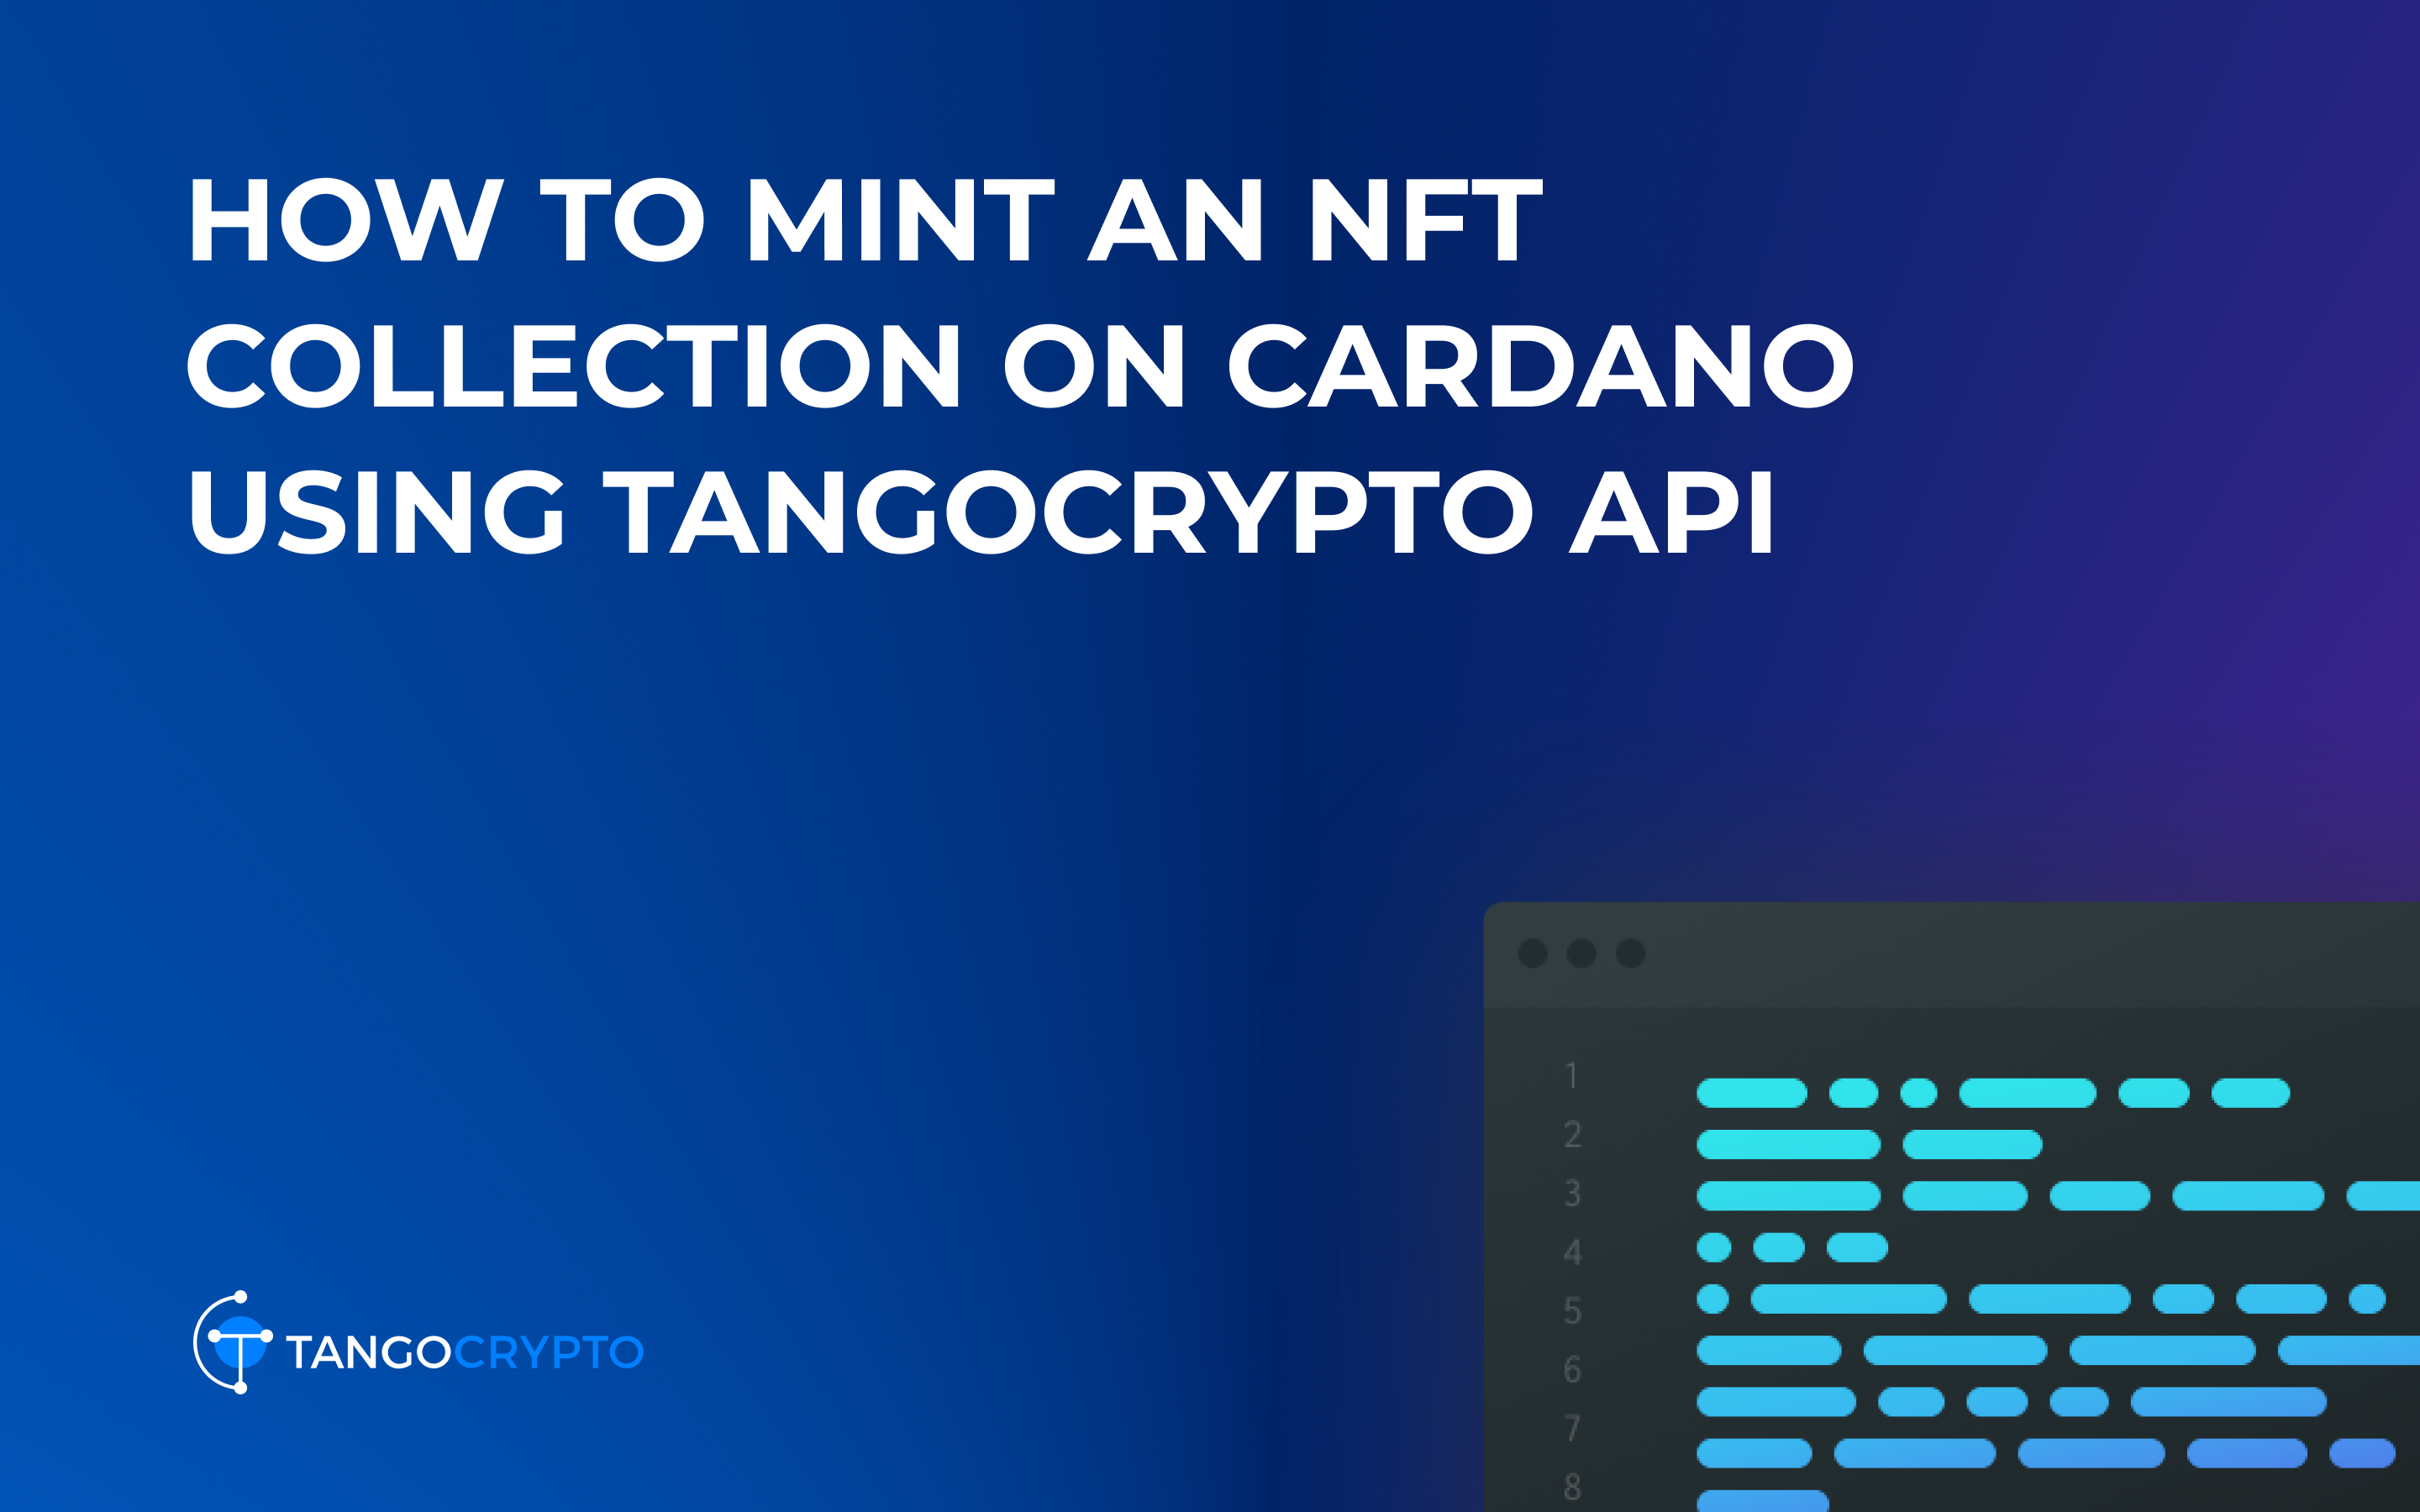 How to mint an NFT collection on Cardano using Tangocrypto API